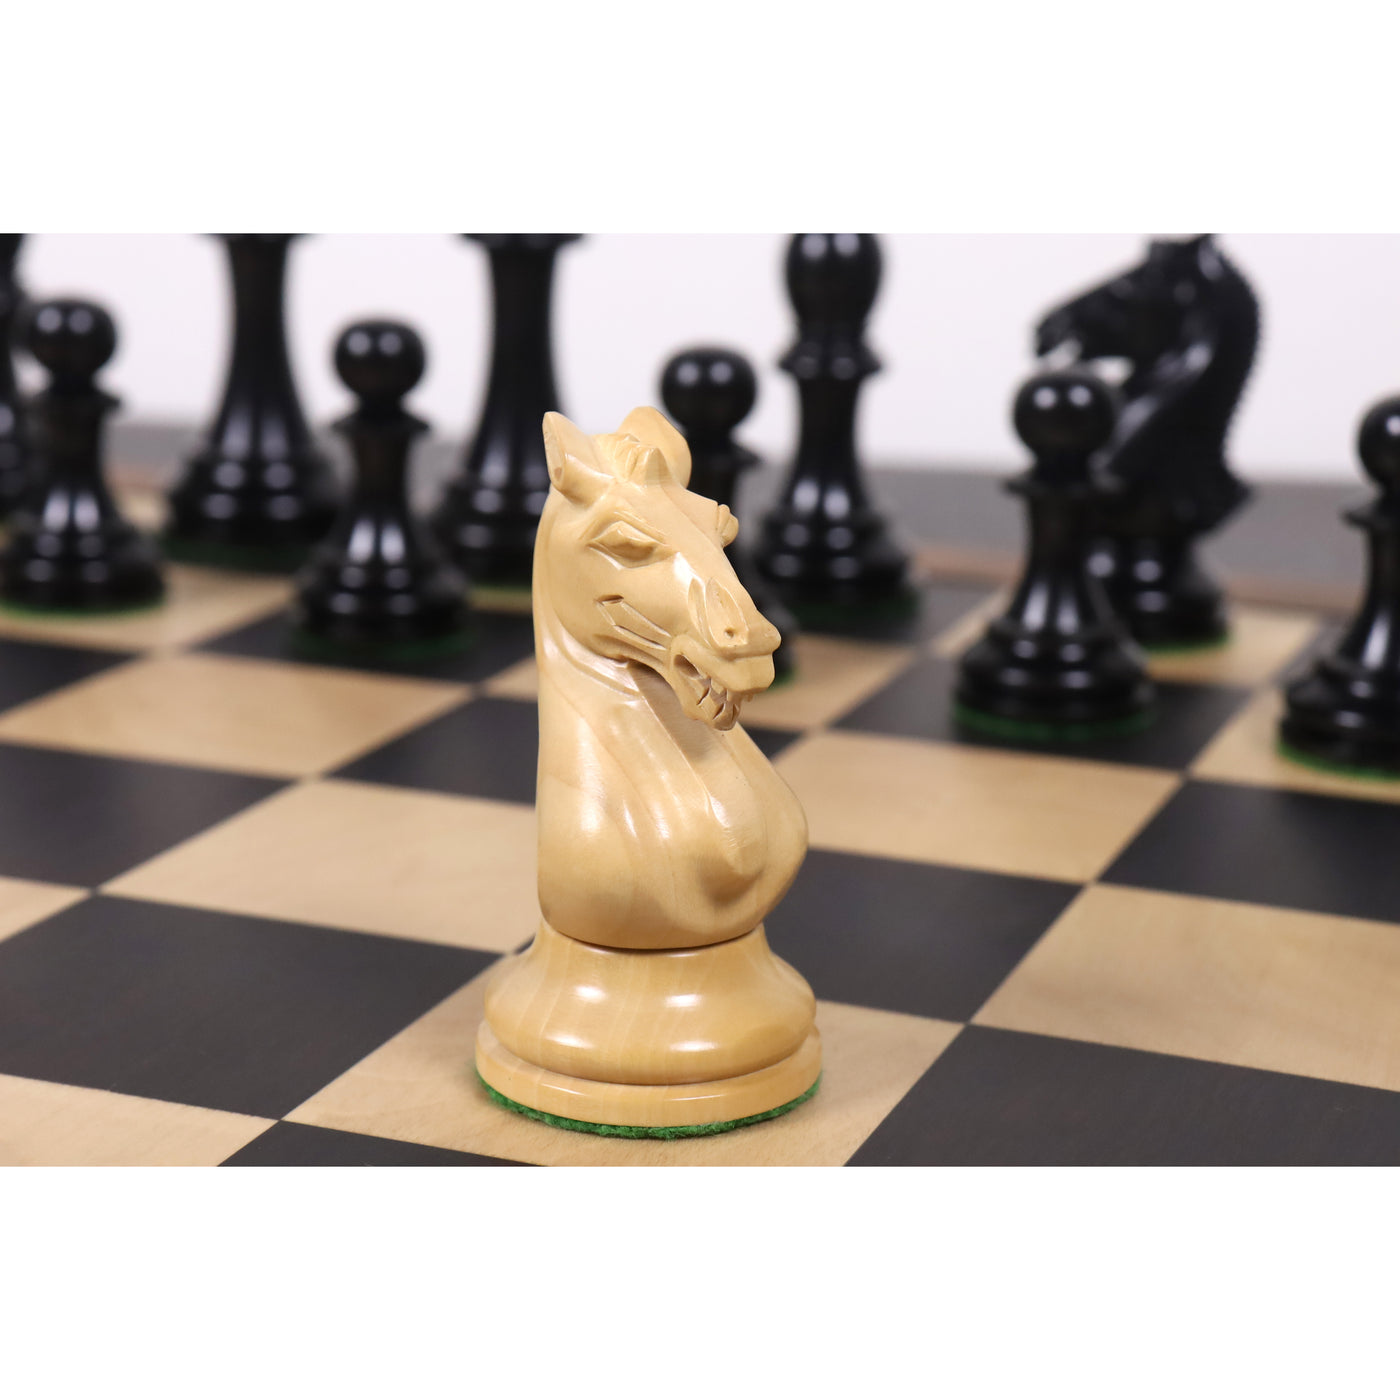 Slightly Imperfect 3.9" Hastings Series Staunton Chess Pieces Only Set